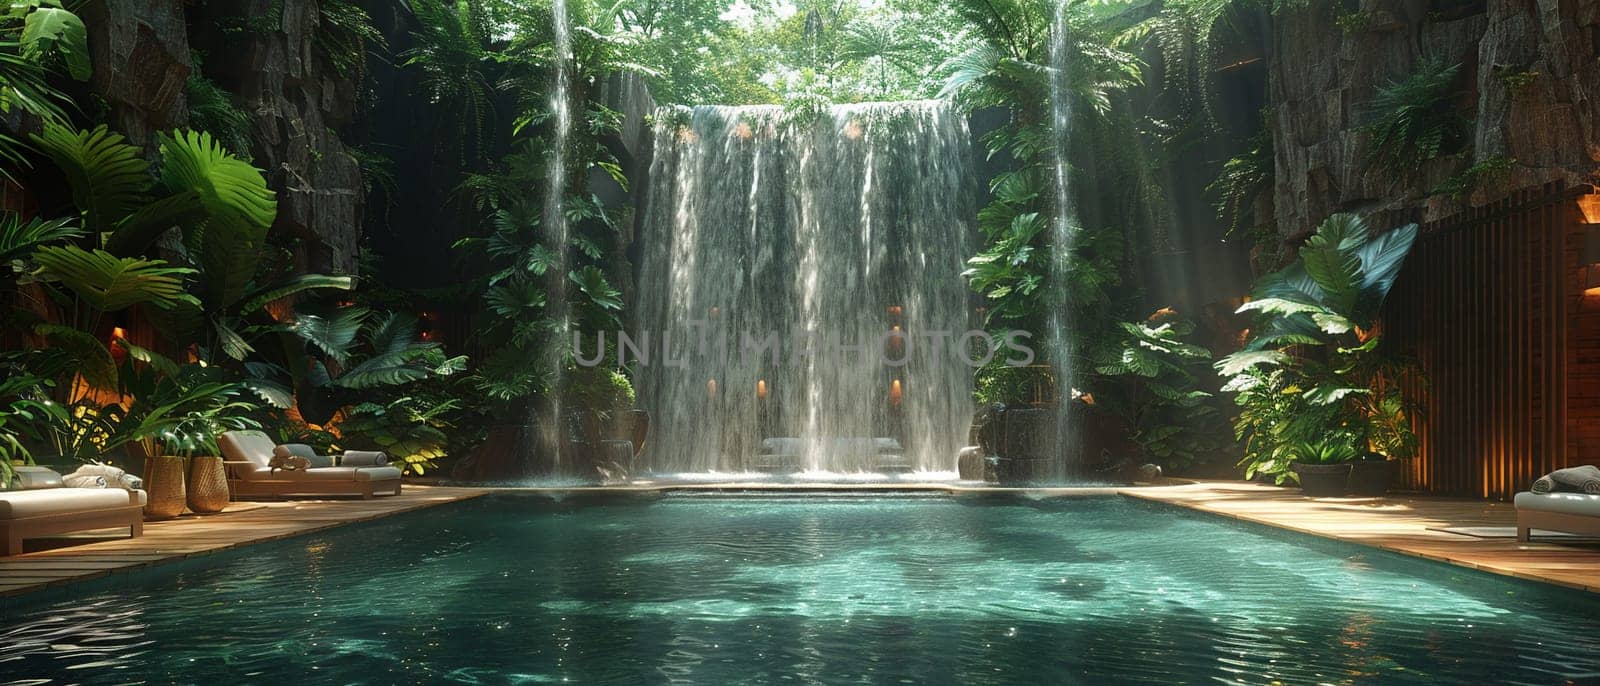 Rainforest-inspired spa with indoor waterfalls and jungle sounds.